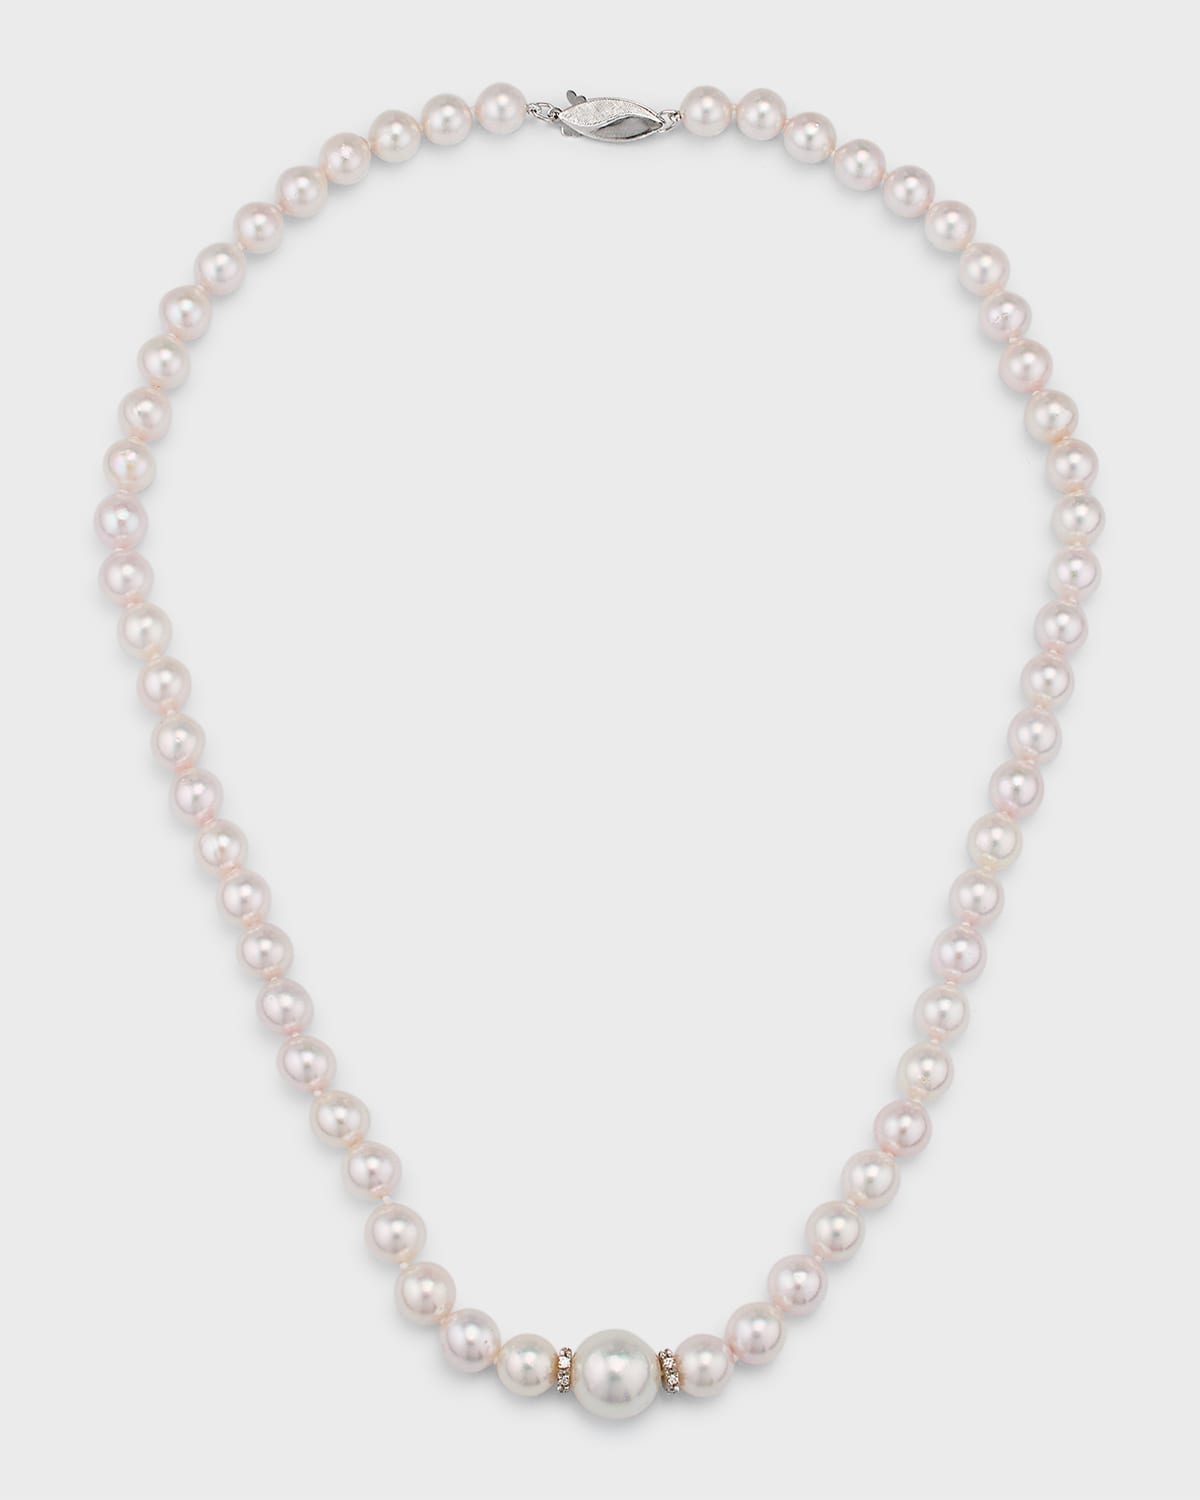 Belpearl Aura 18K White Gold Pearl & Diamond Necklace